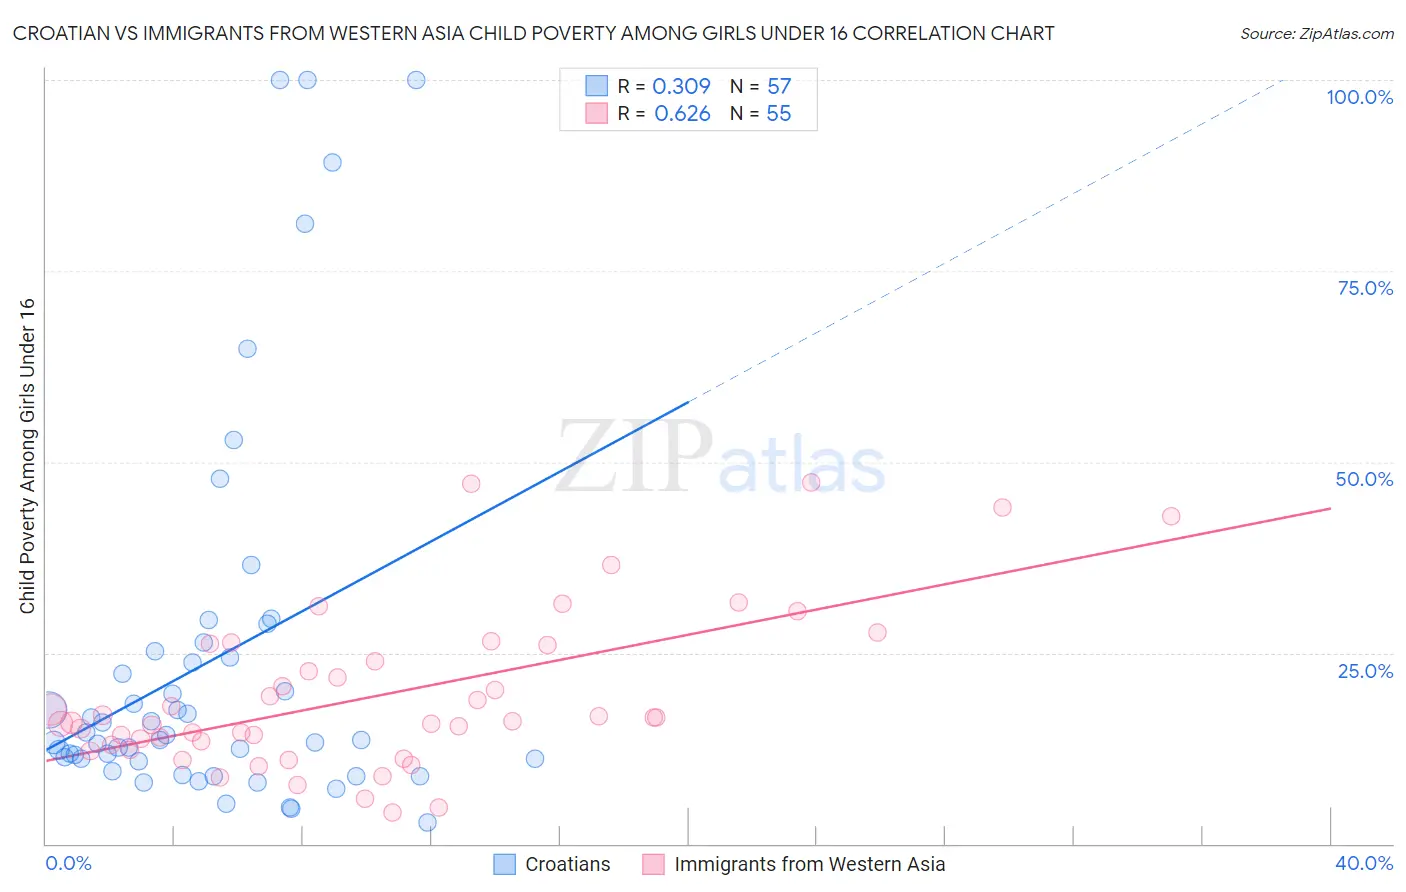 Croatian vs Immigrants from Western Asia Child Poverty Among Girls Under 16